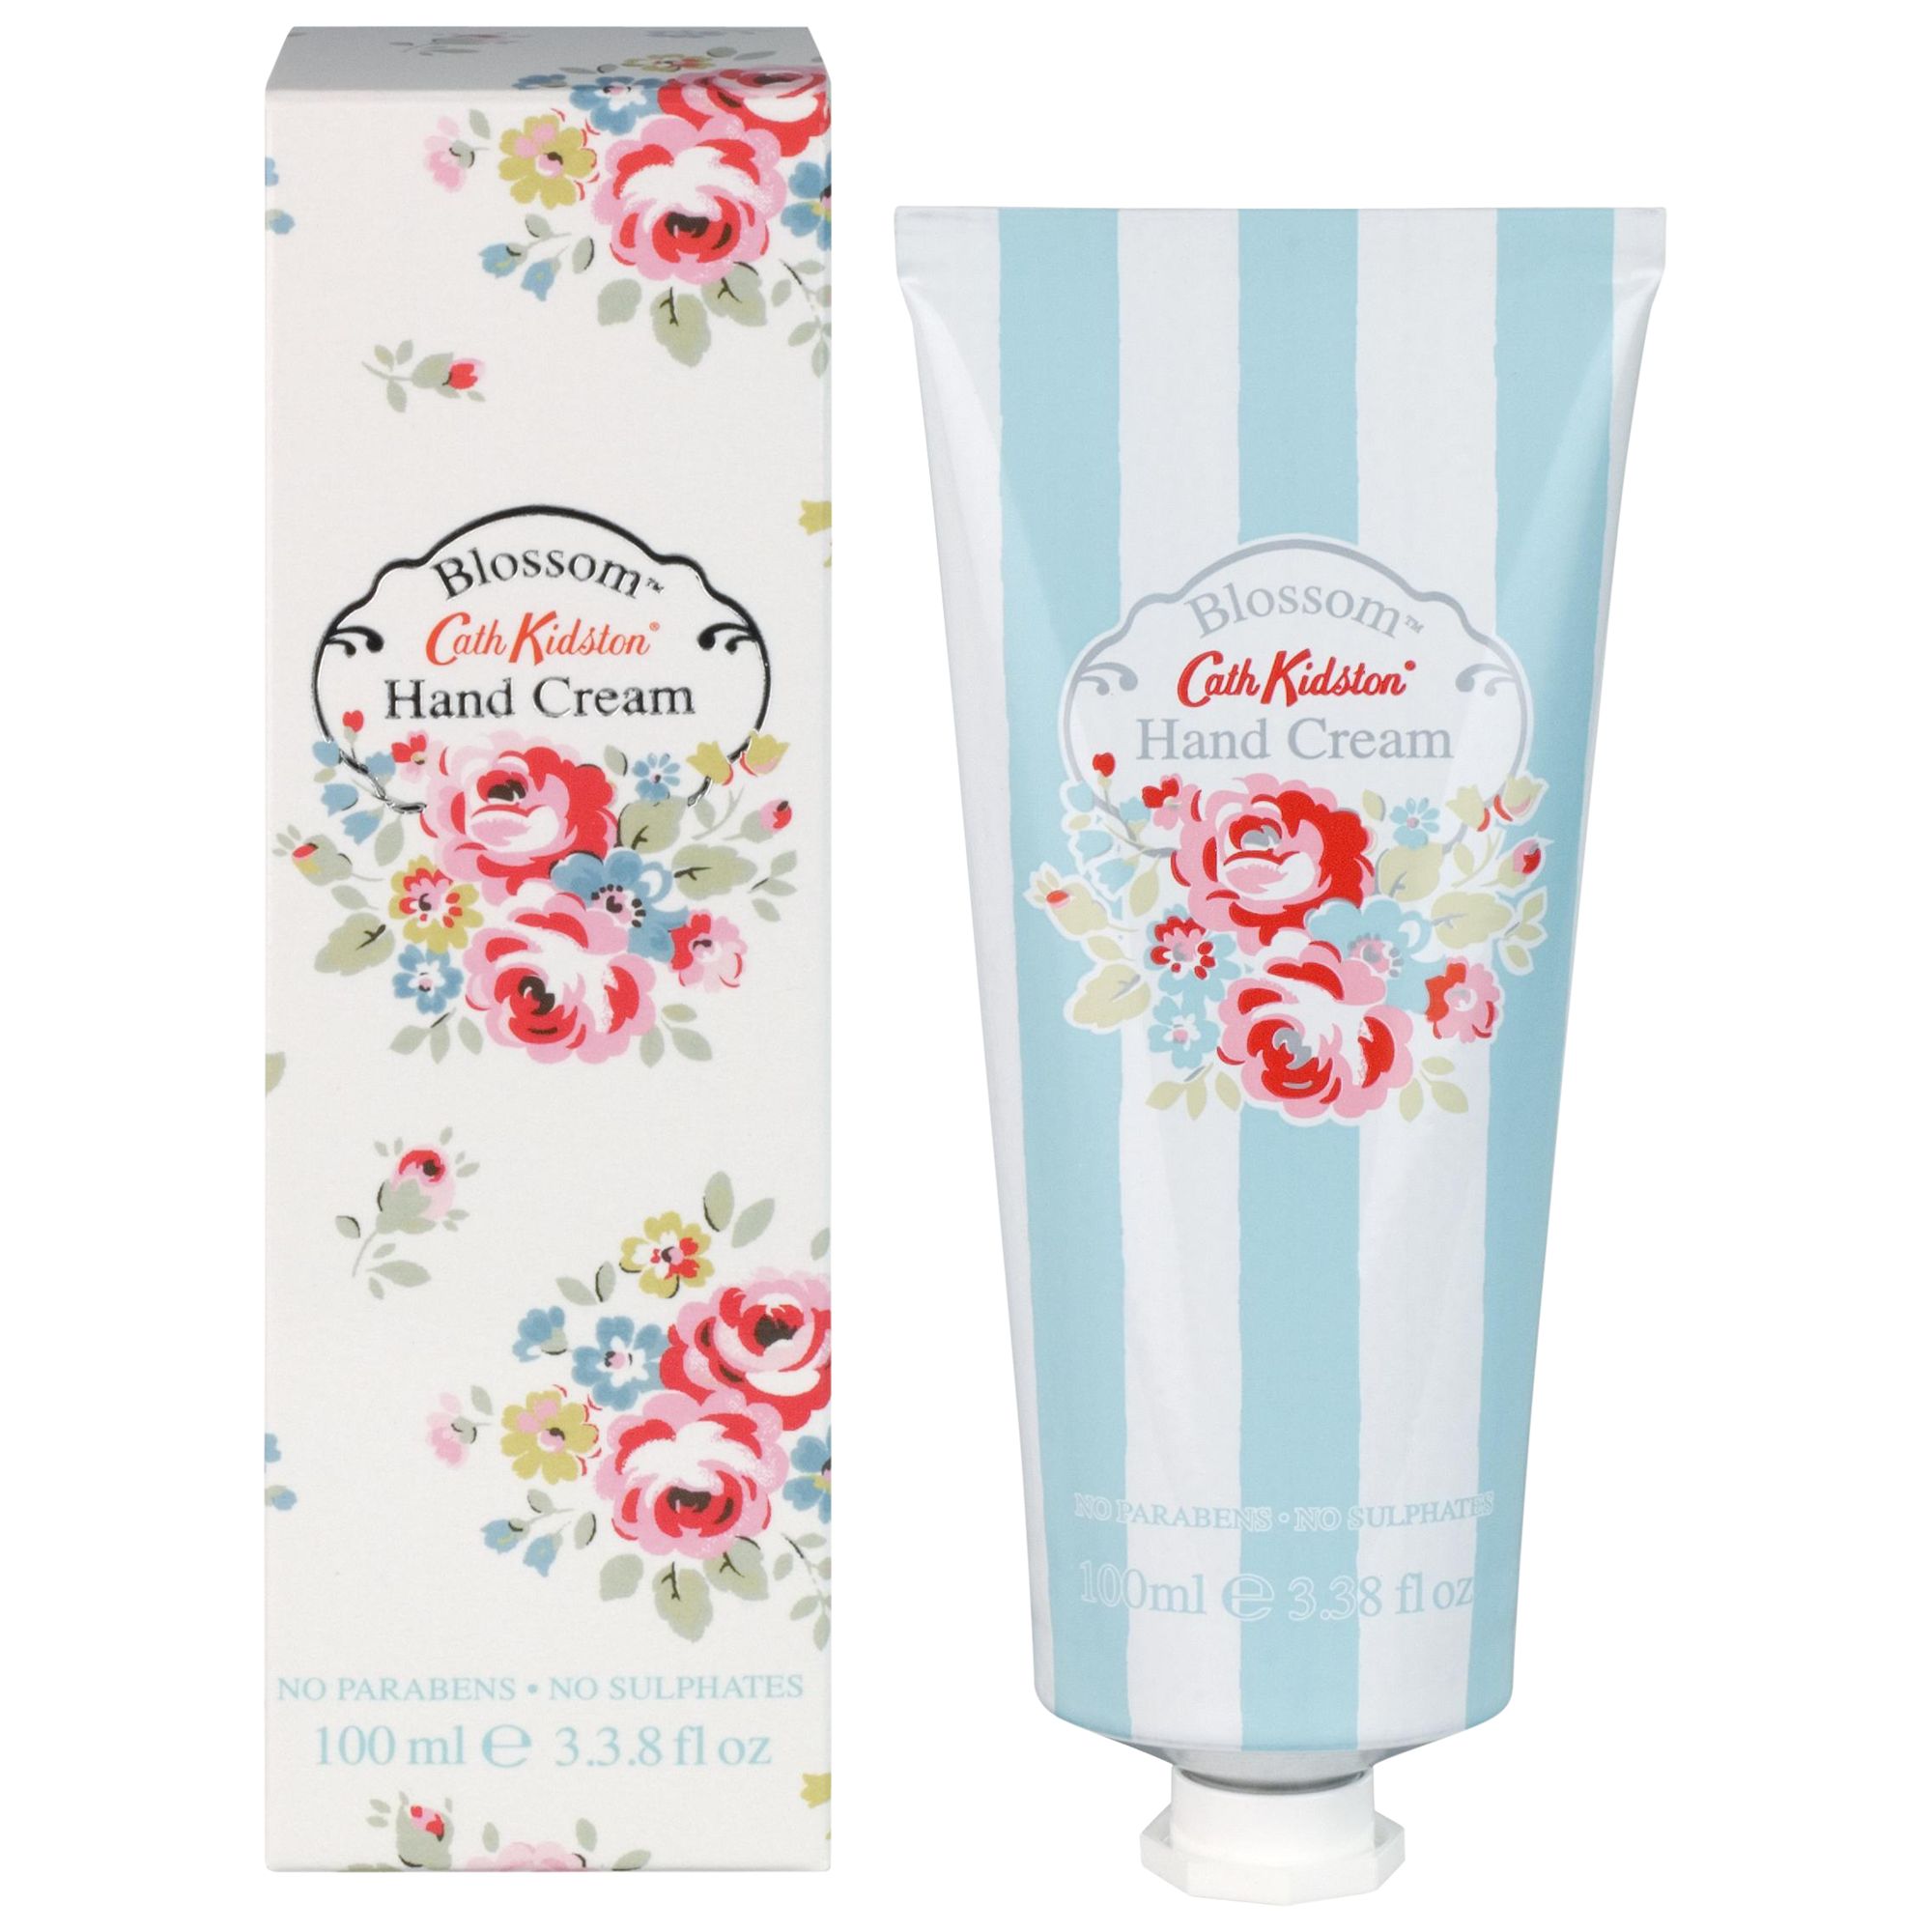 cath kidston voucher code free delivery